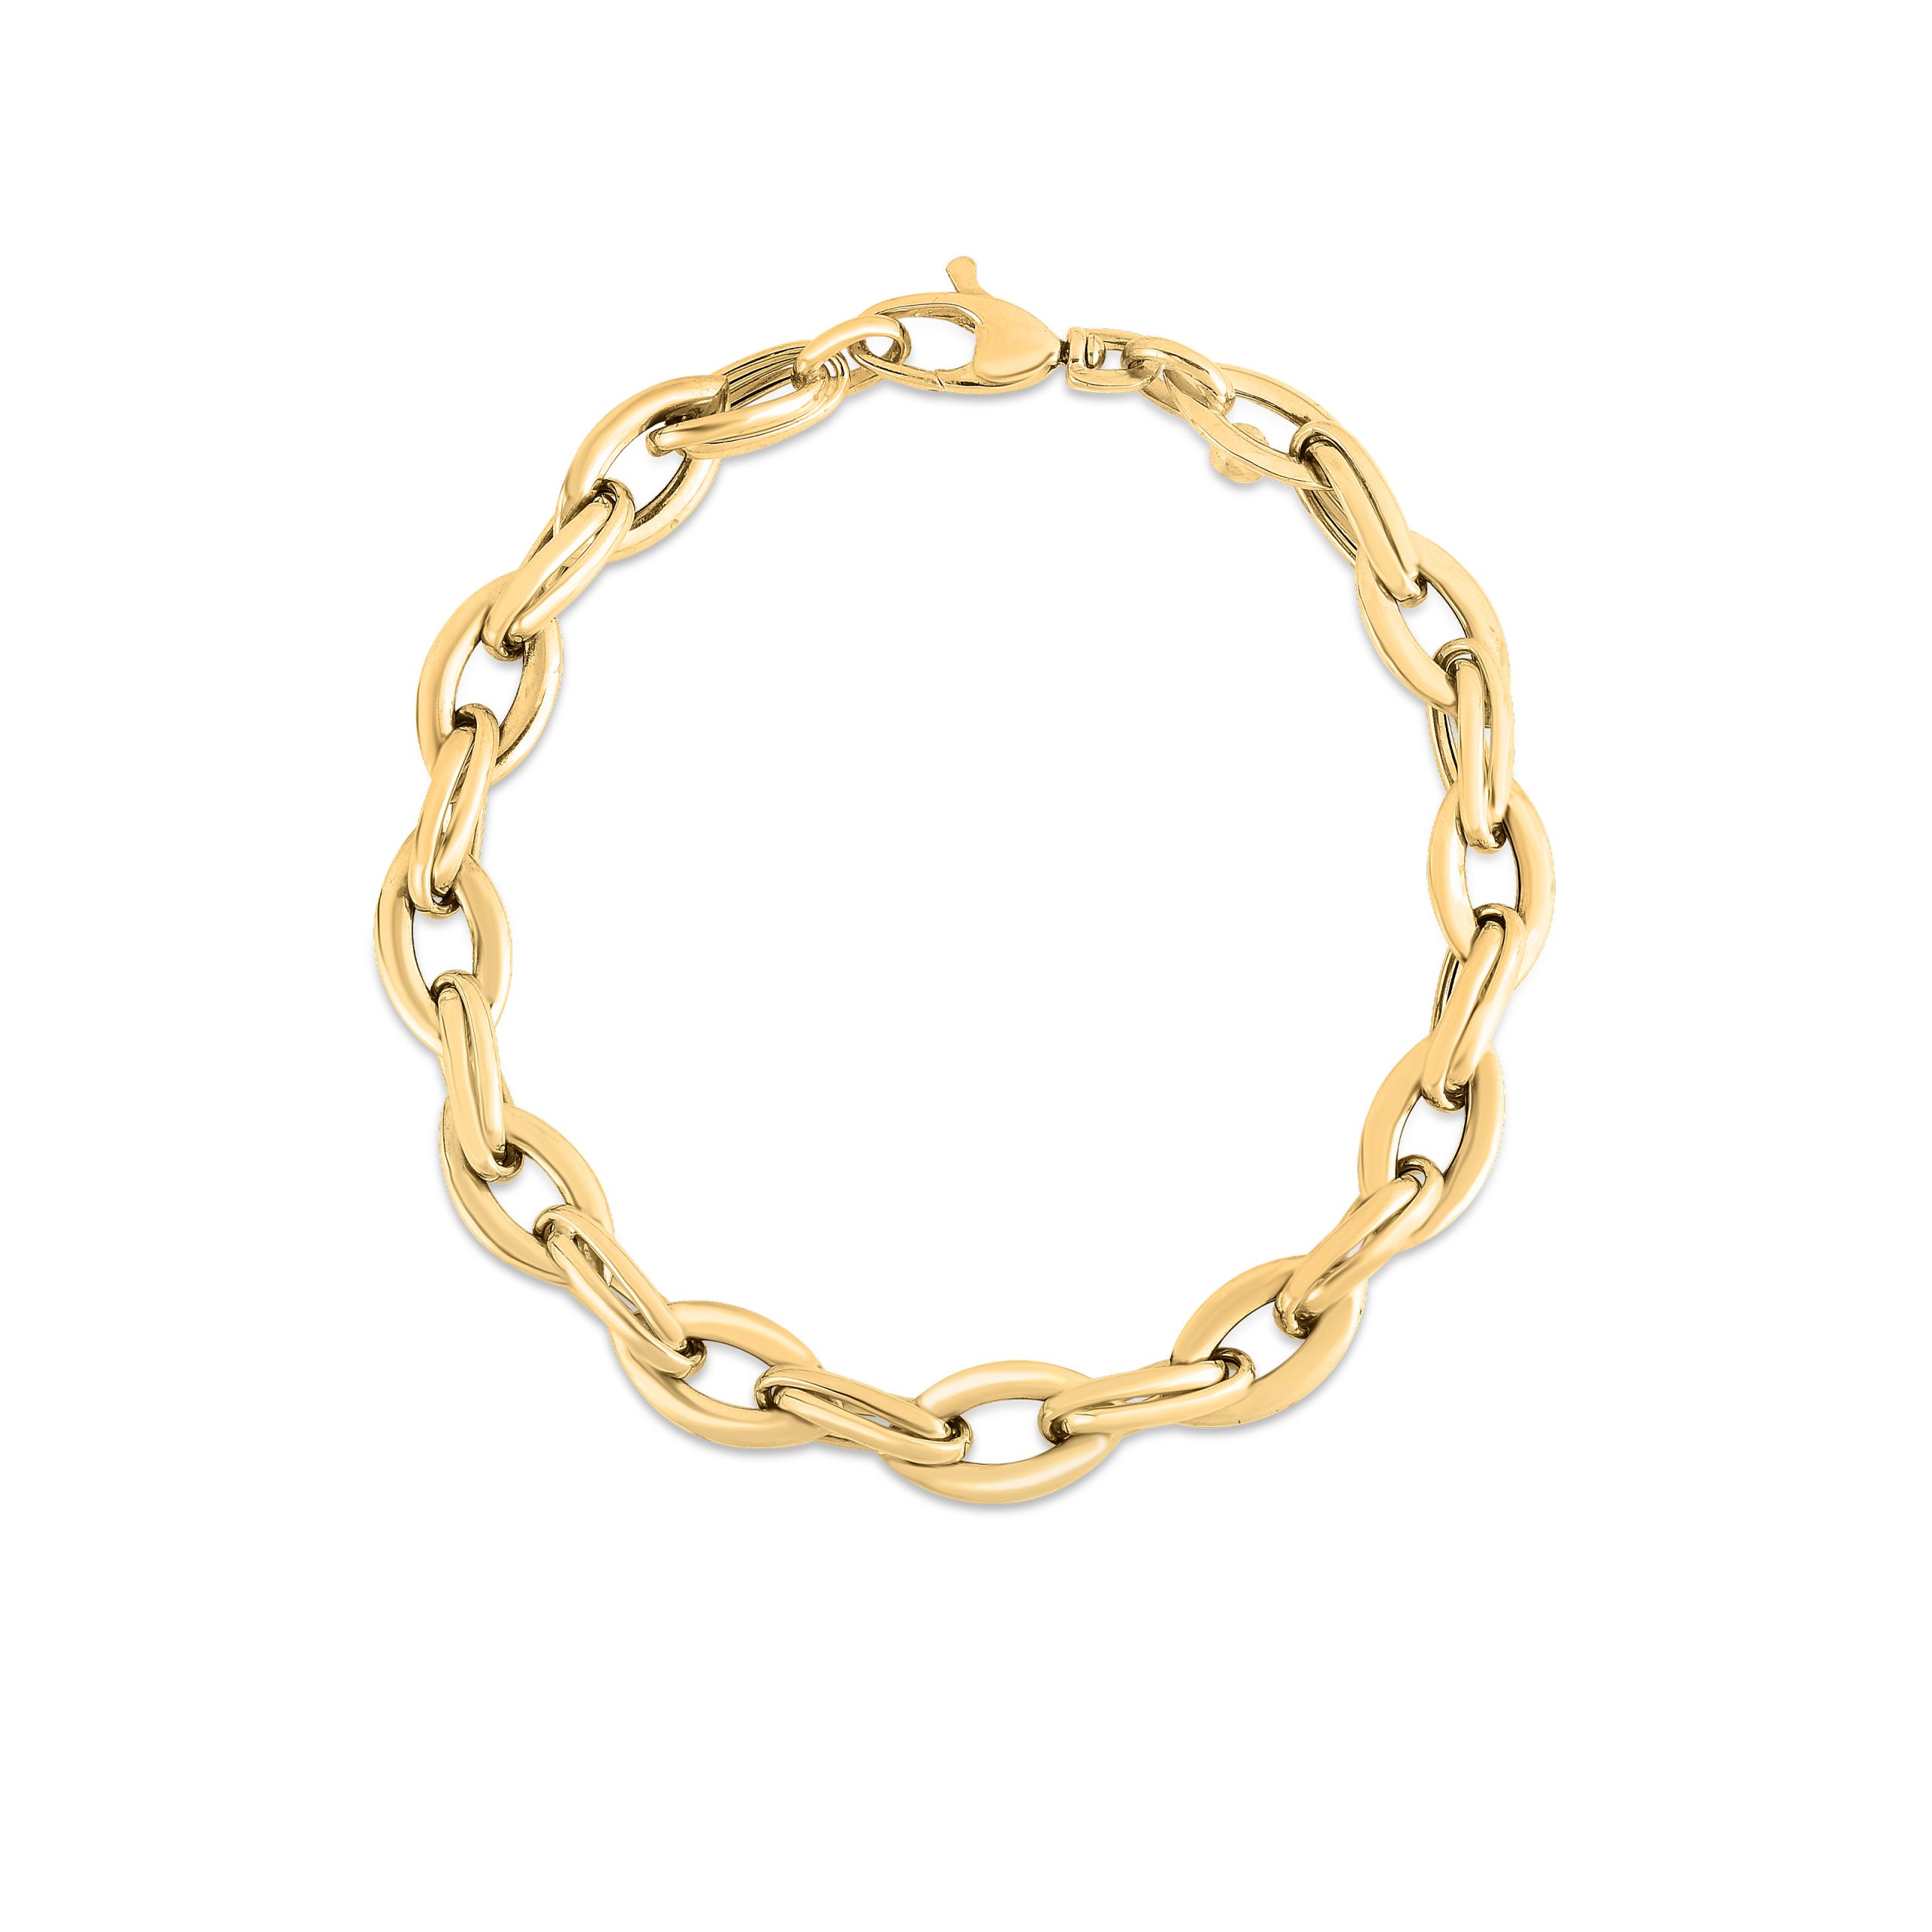 Roberto Coin Classic Gold 18k Yellow Gold Almond Link Chain Bracelet